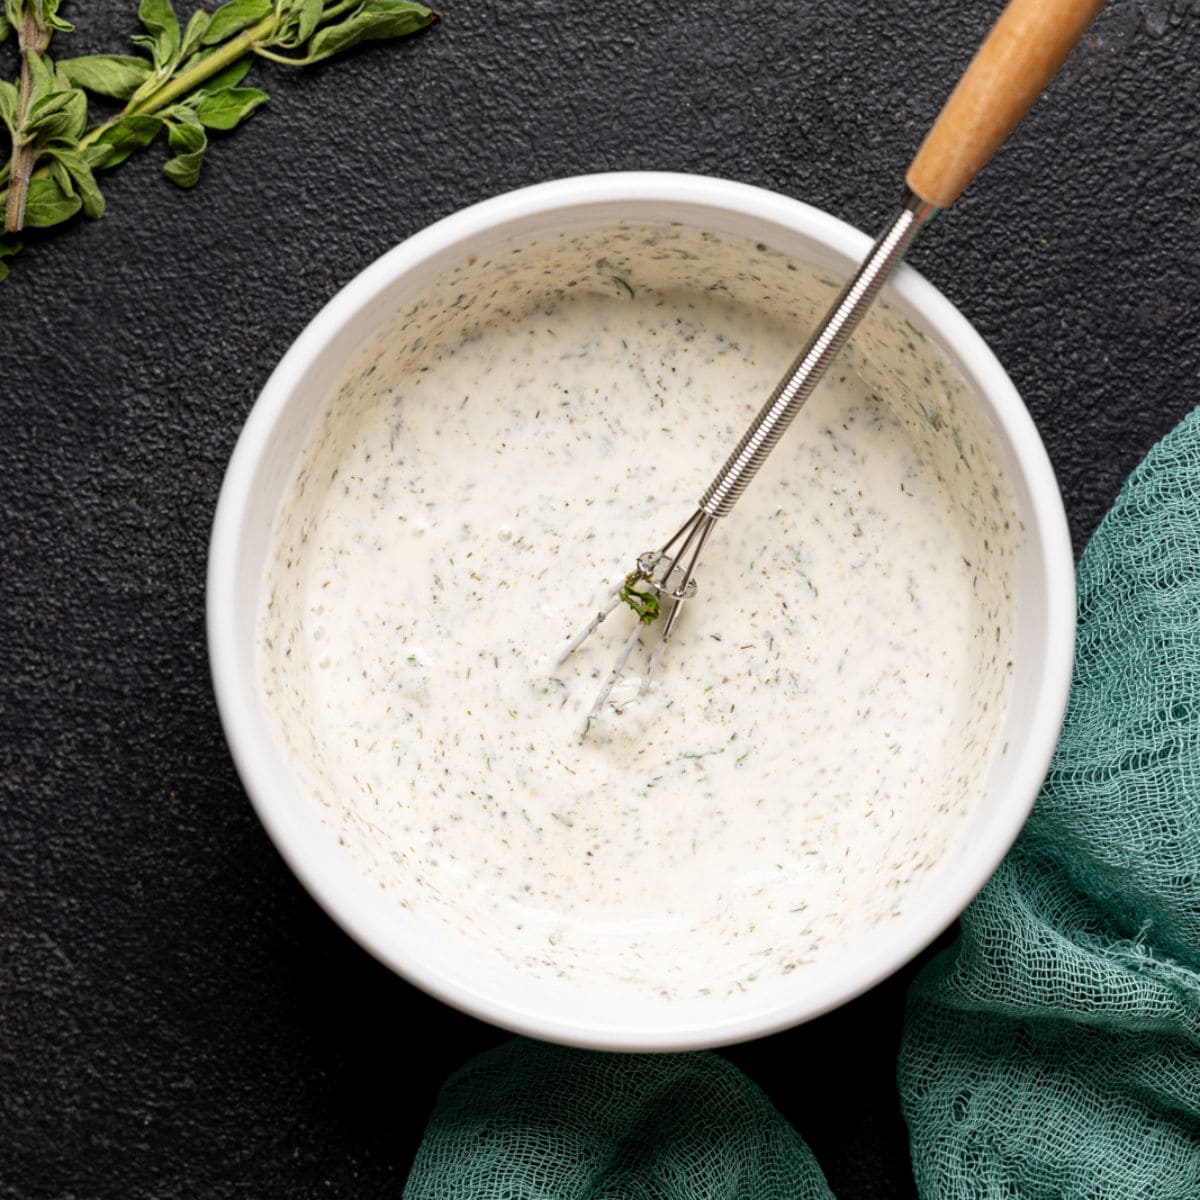 Ranch dressing in a white bowl on a black table with a whisk.